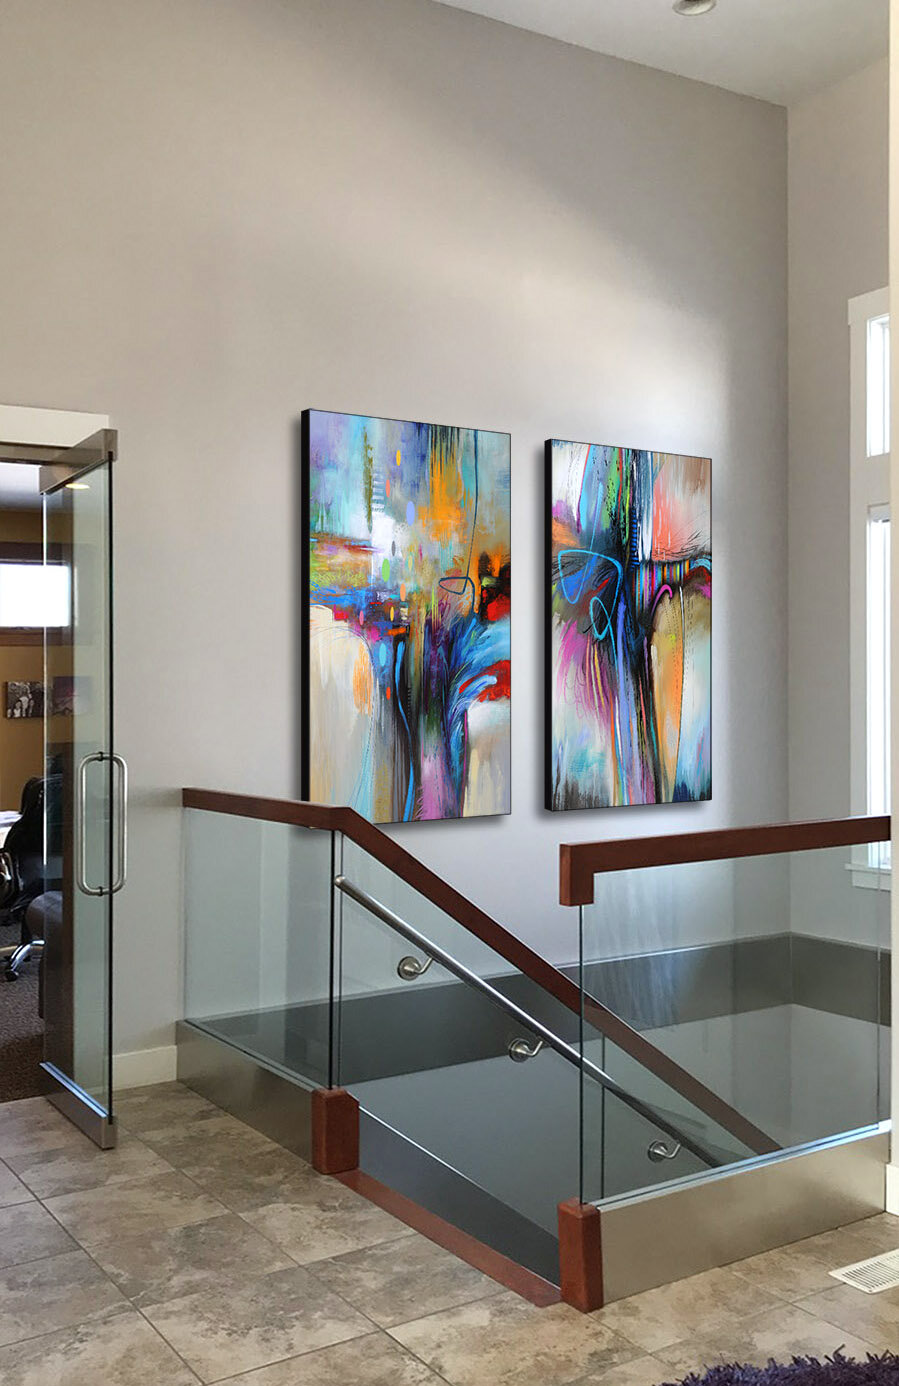 Large abstract artwork naples fl, large abstract paintings, Large abstract prints southwest fl, artist Tim Parker Art Naples FL Stairs_v1.jpg